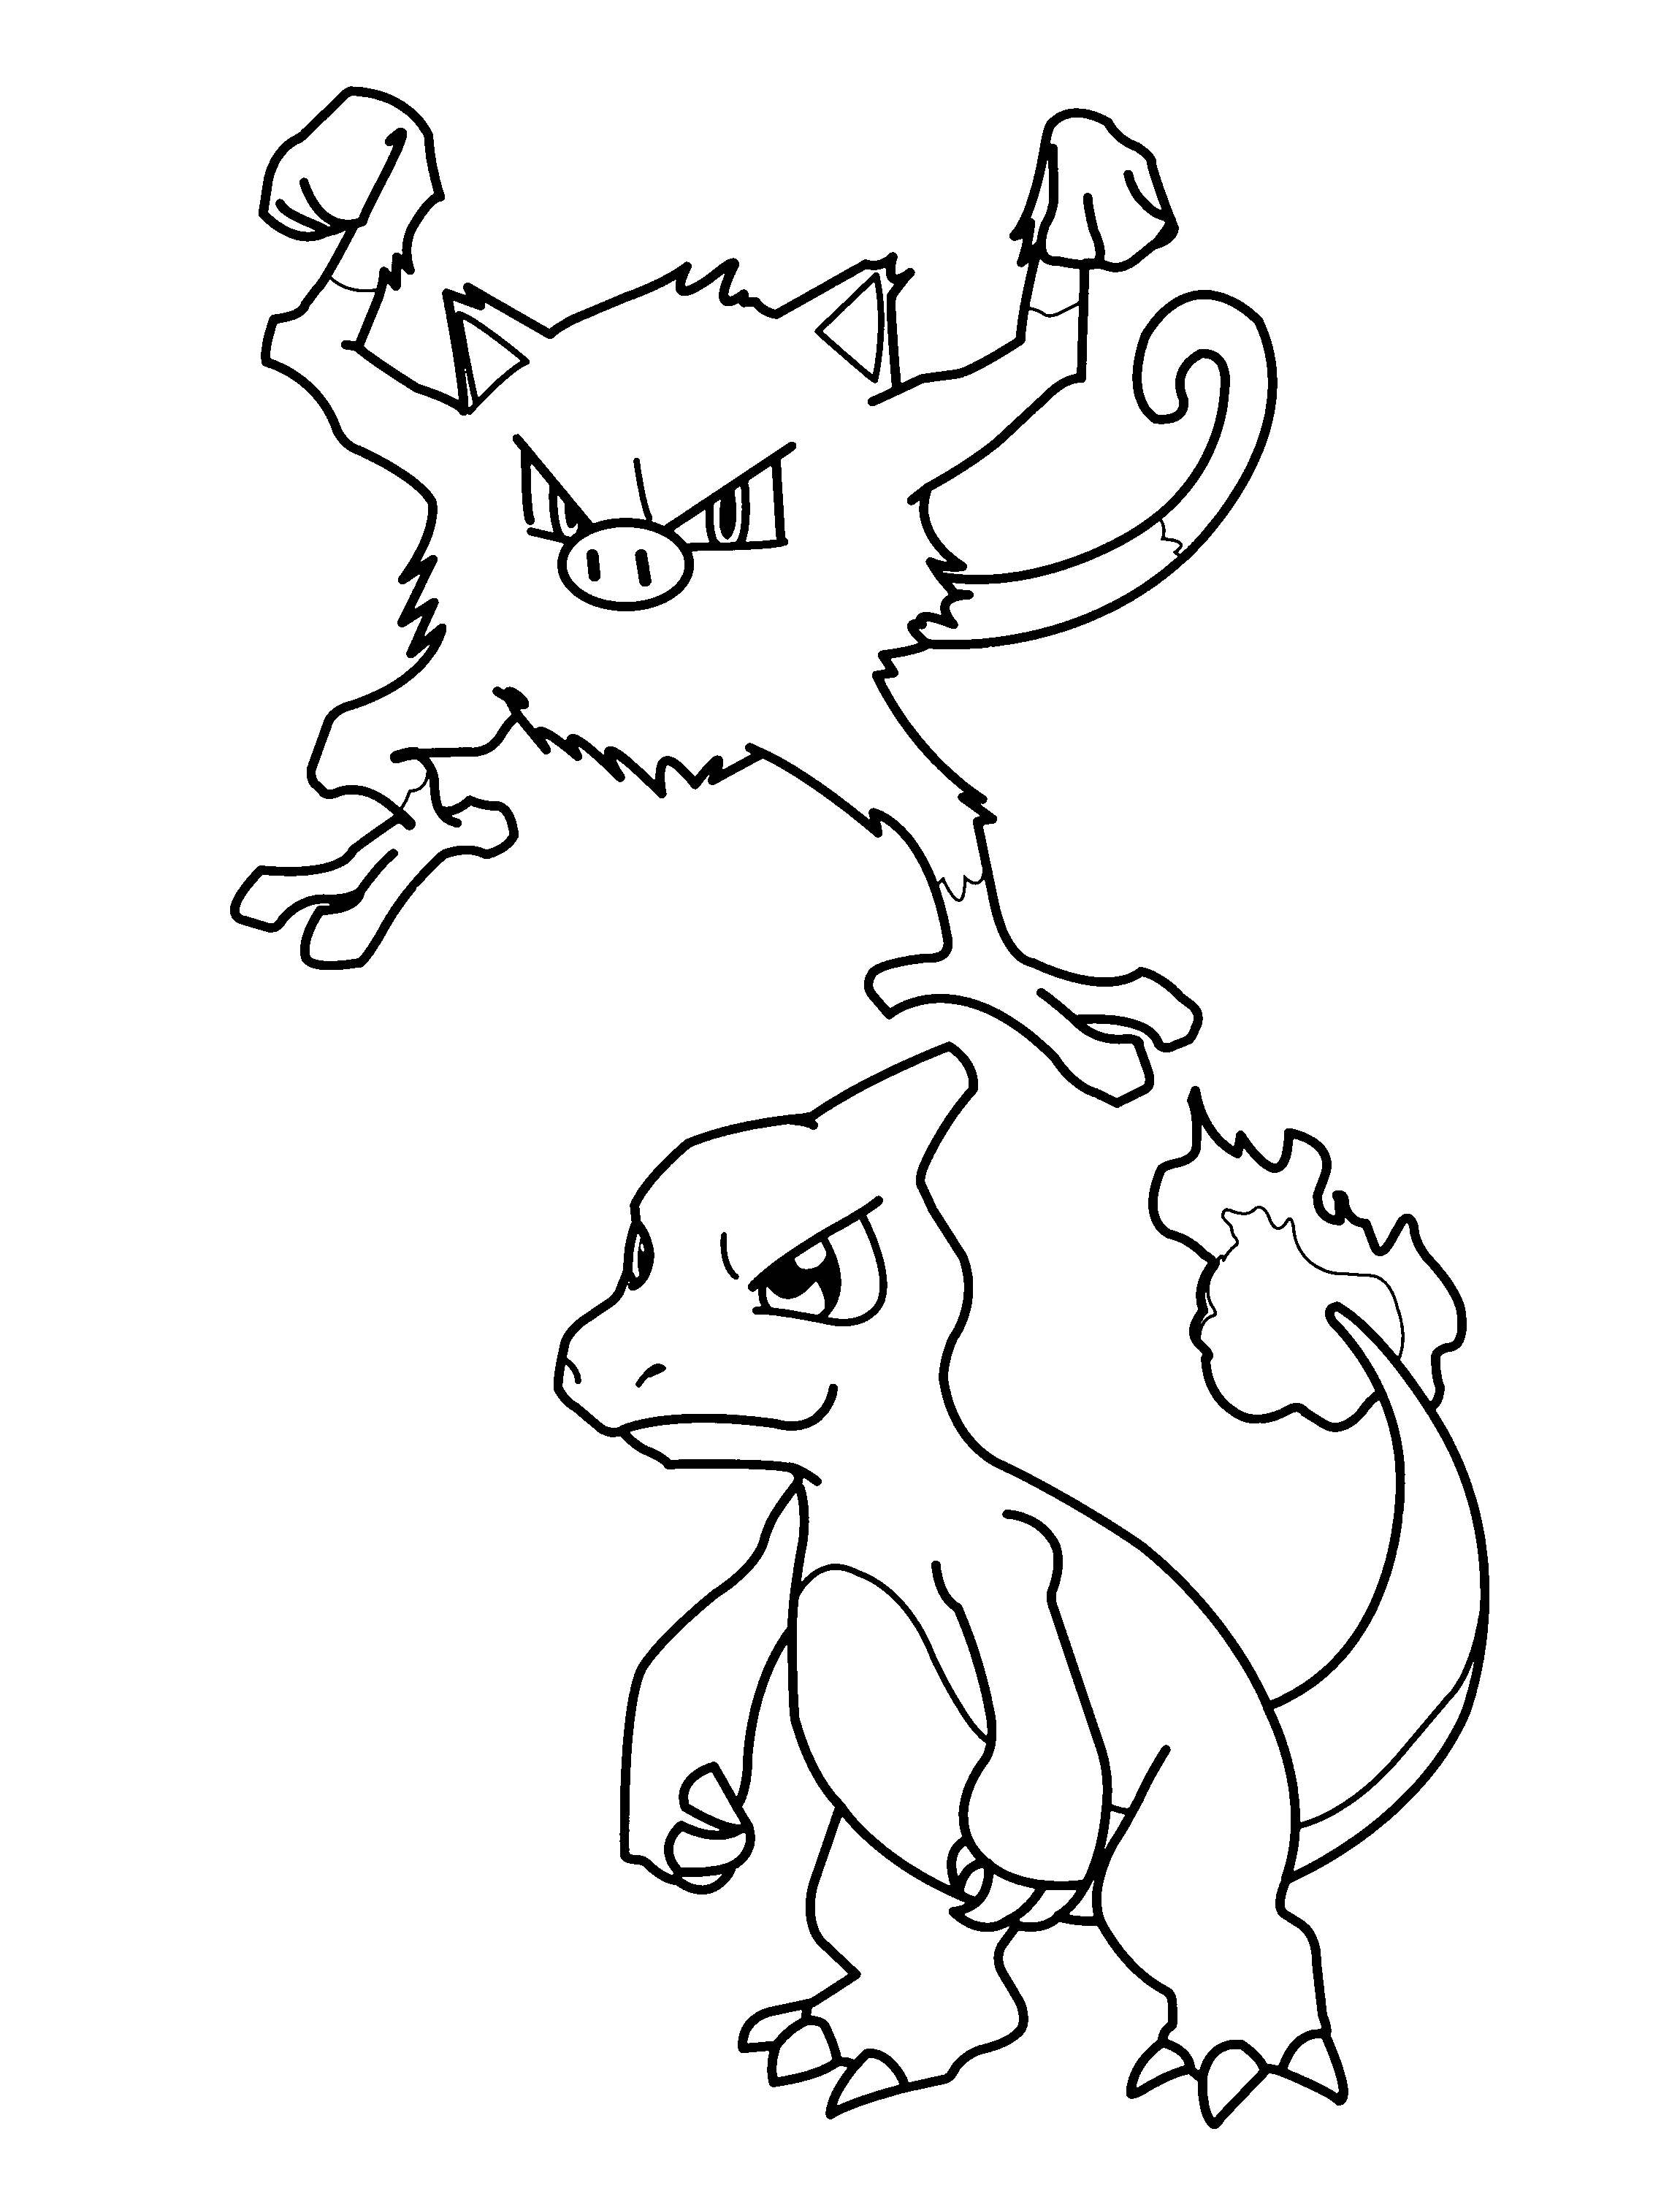 animated-coloring-pages-pokemon-image-0310